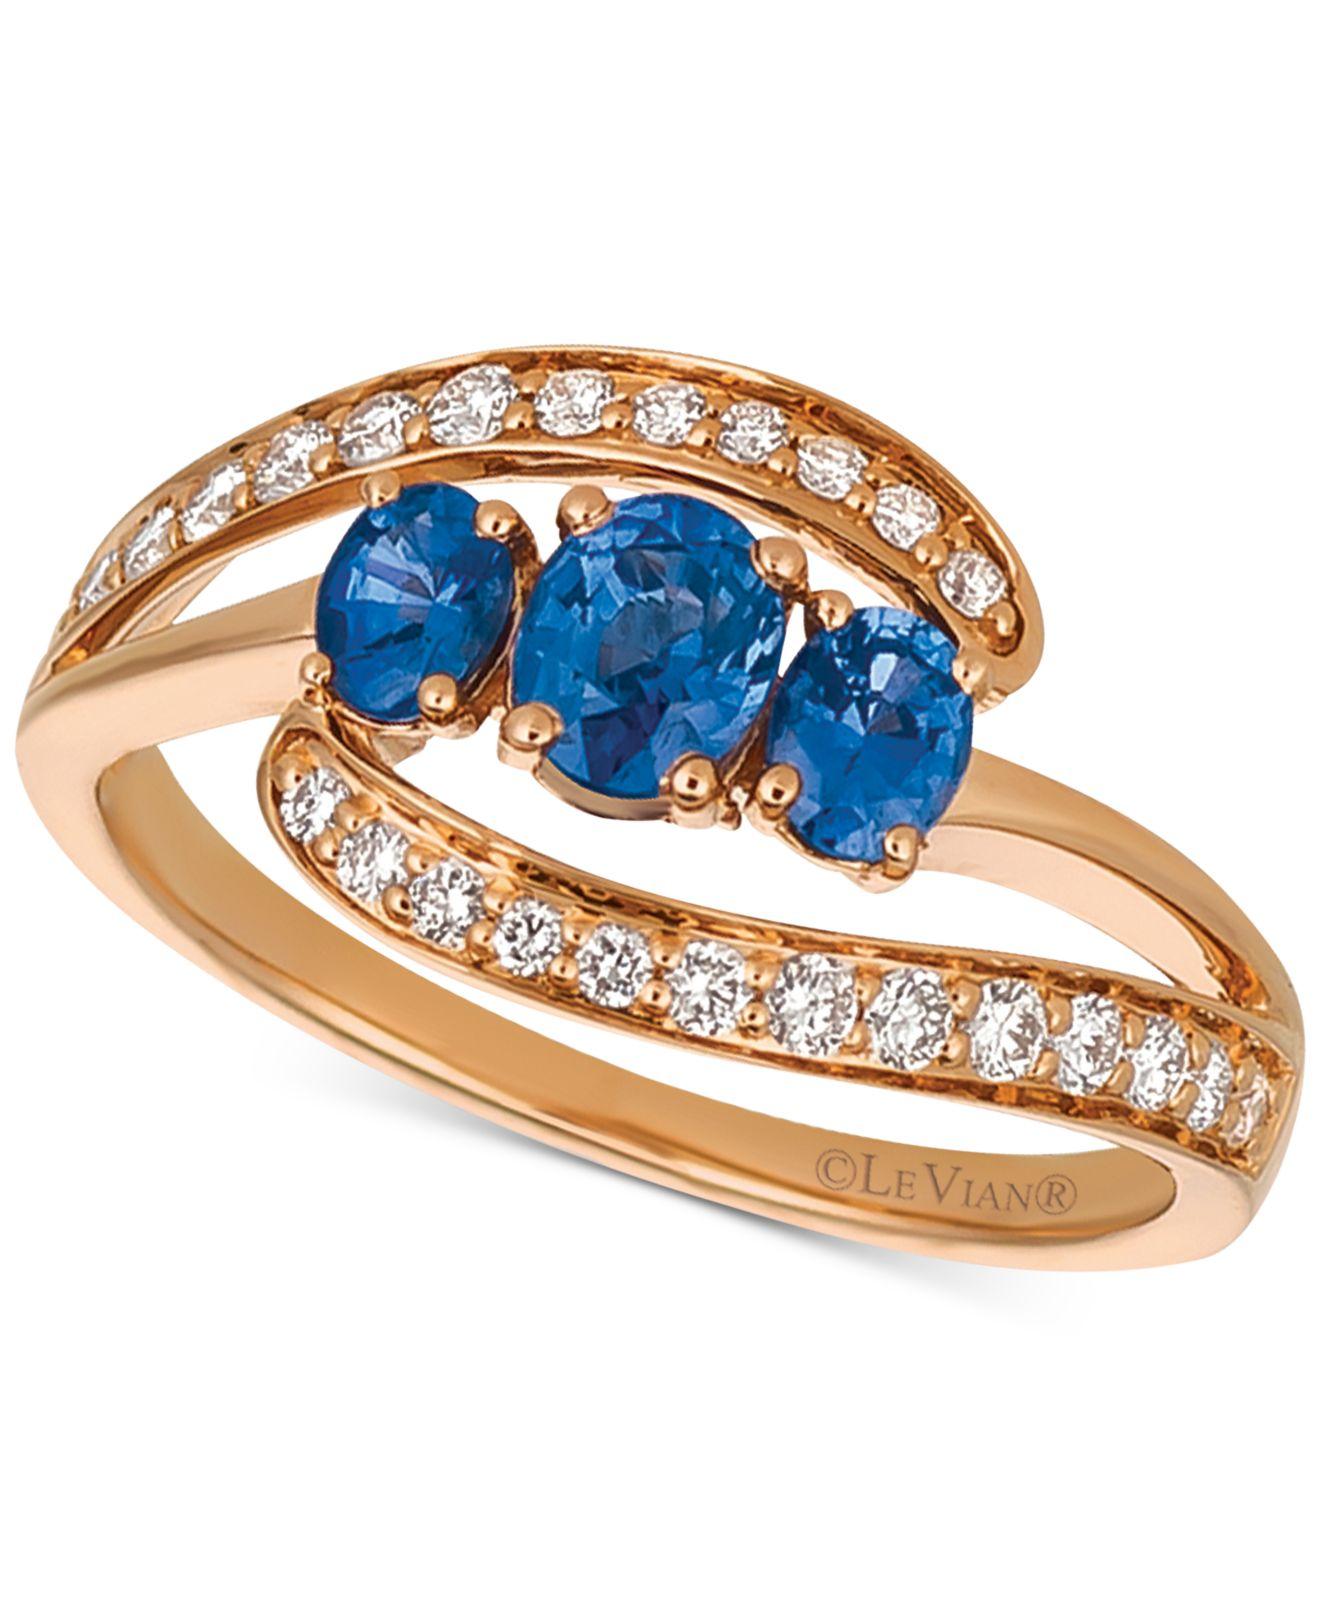 Le Vian ® Blueberry Sapphire (3/4 Ct. T.w.) & Diamond (1/4 Ct. T.w.) Ring In 14k Rose Gold Lyst